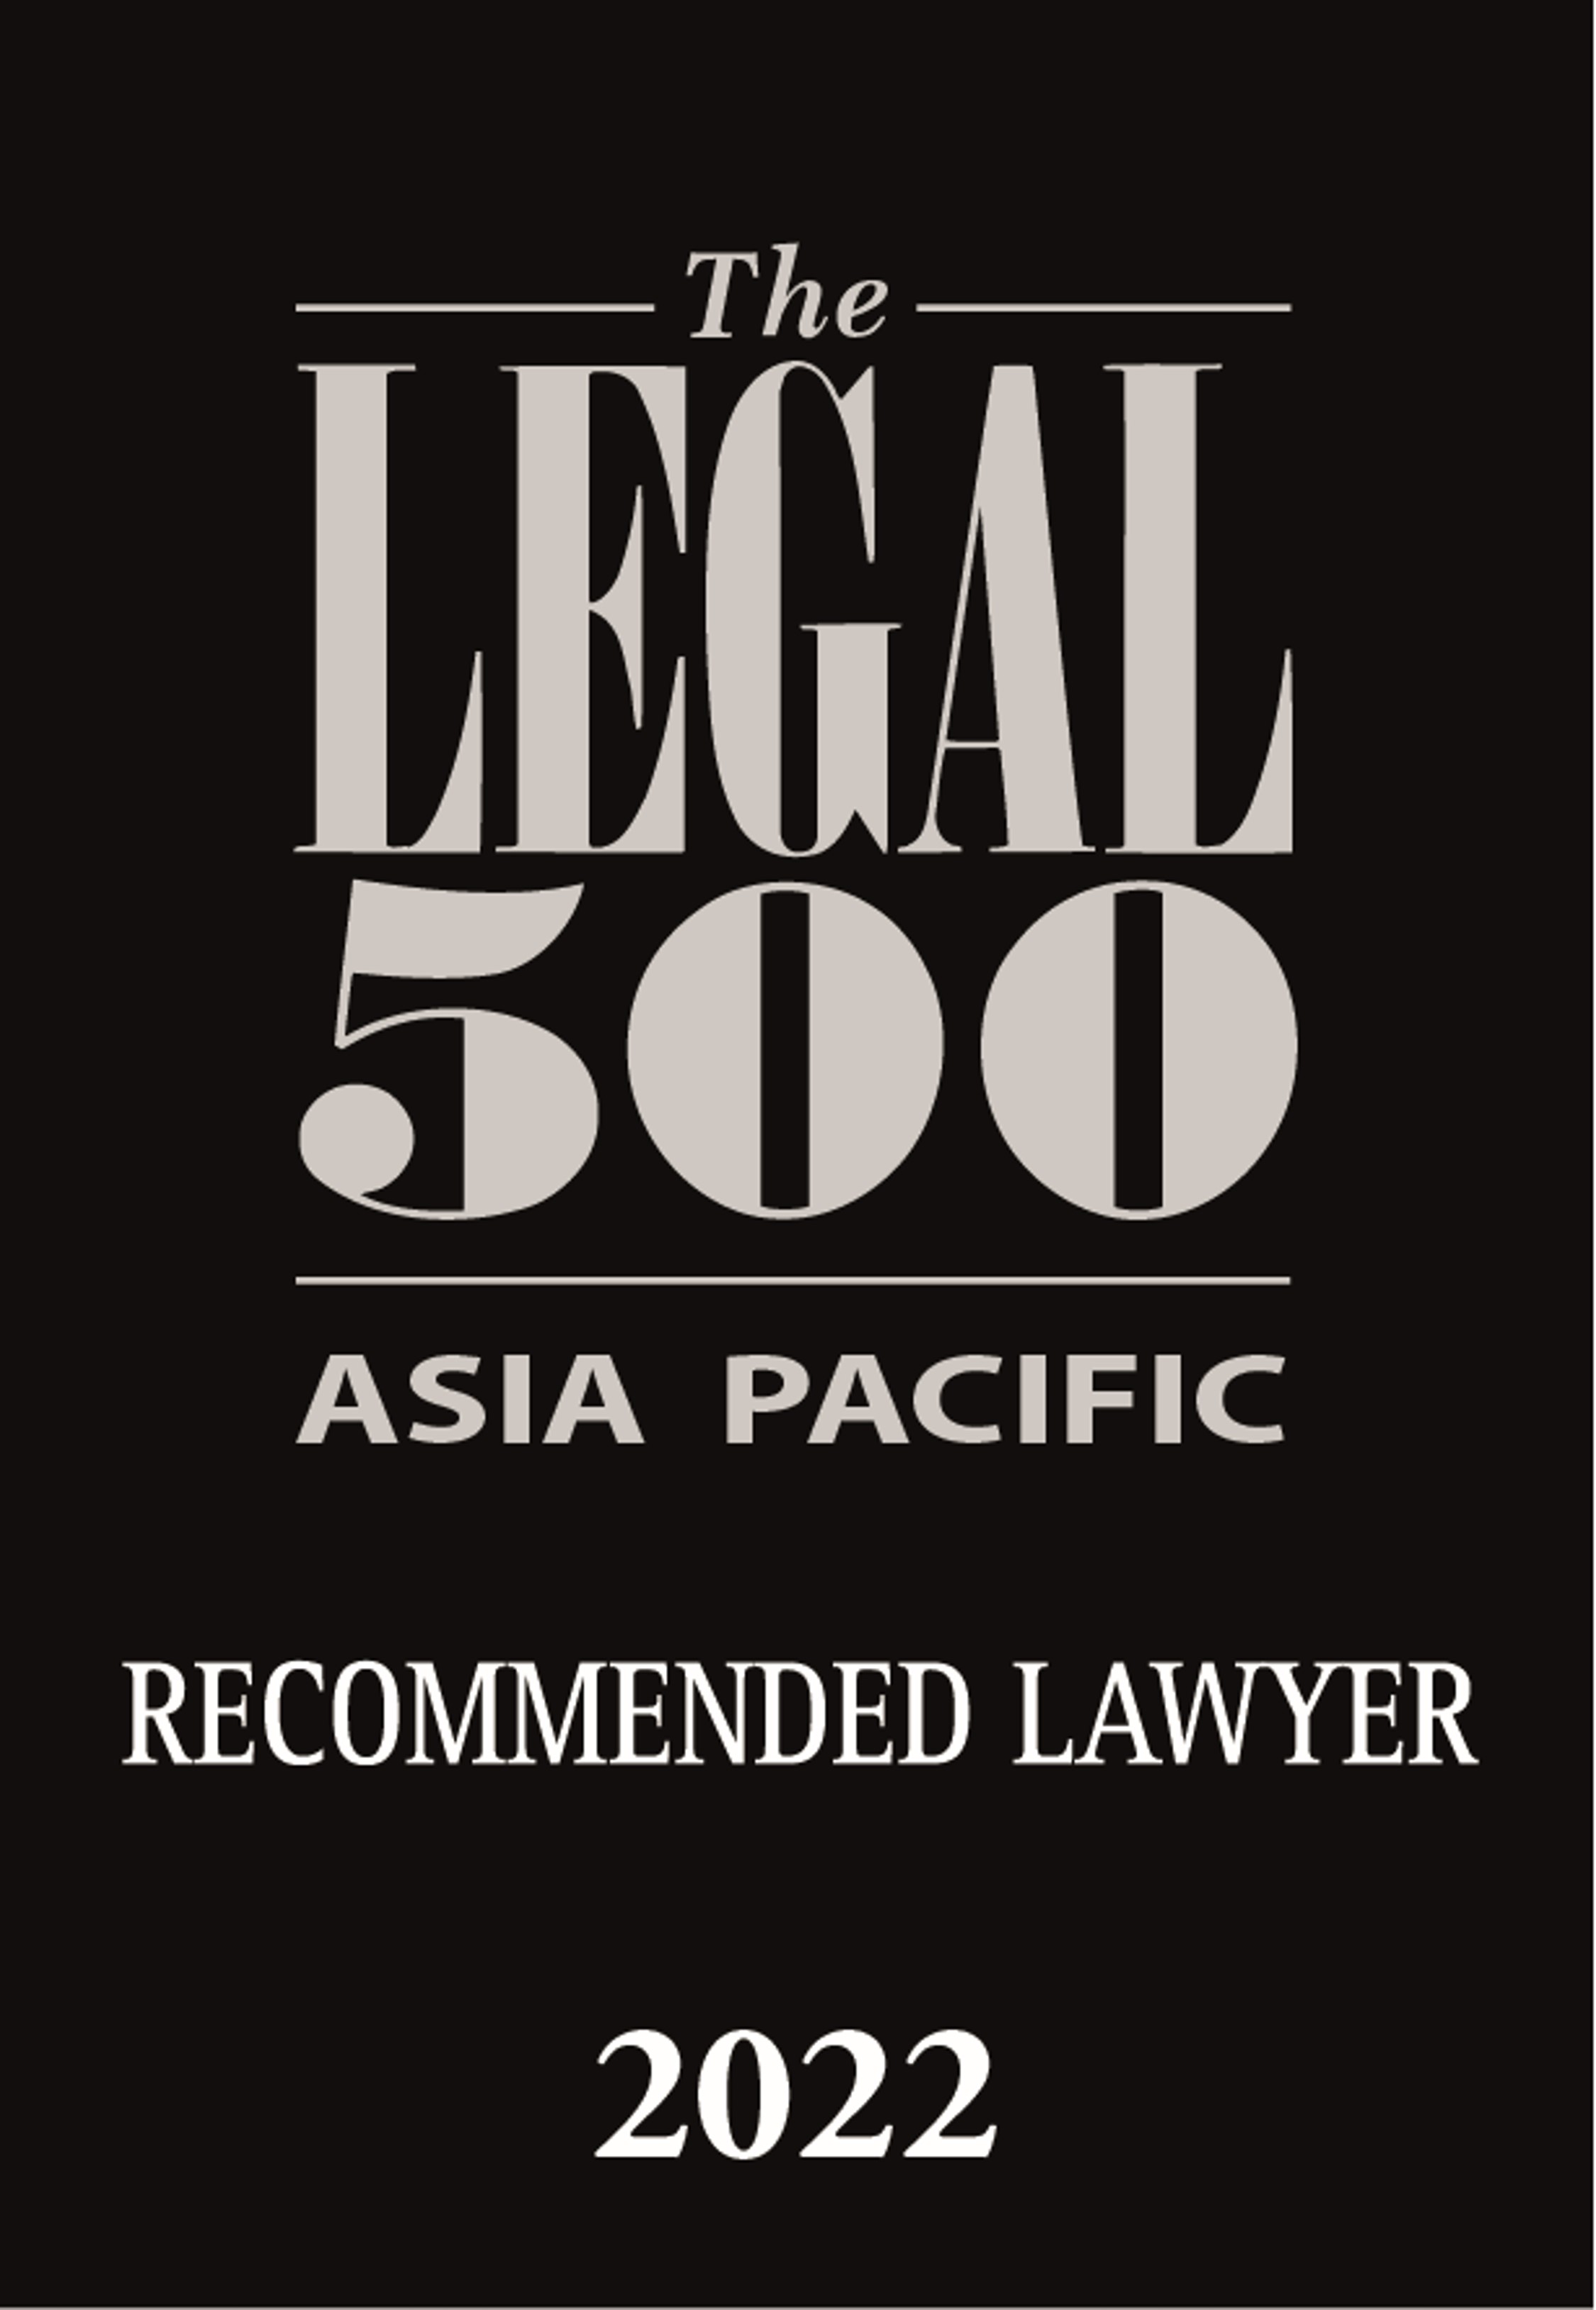 Rossana Chu is recognised as “Recommended Lawyer” in Corporate (including M&A) by Legal 500 Asia Pacific, 2022